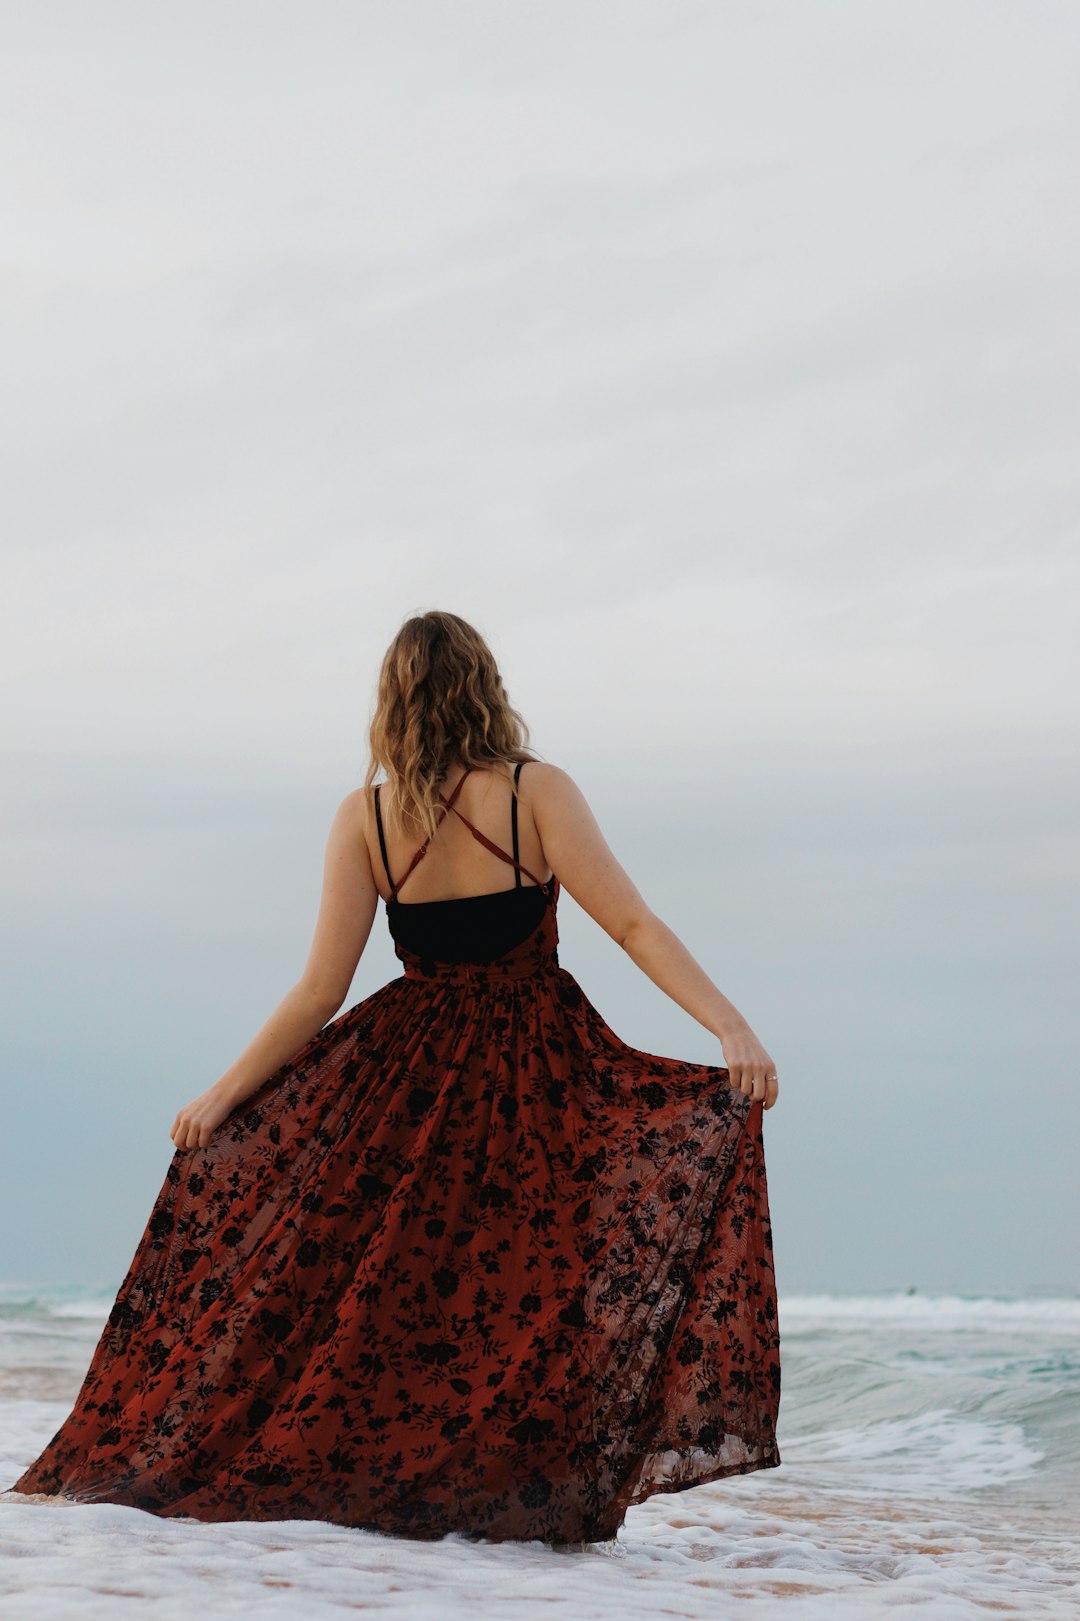 woman in black and red spaghetti strap dress standing on beach during daytime